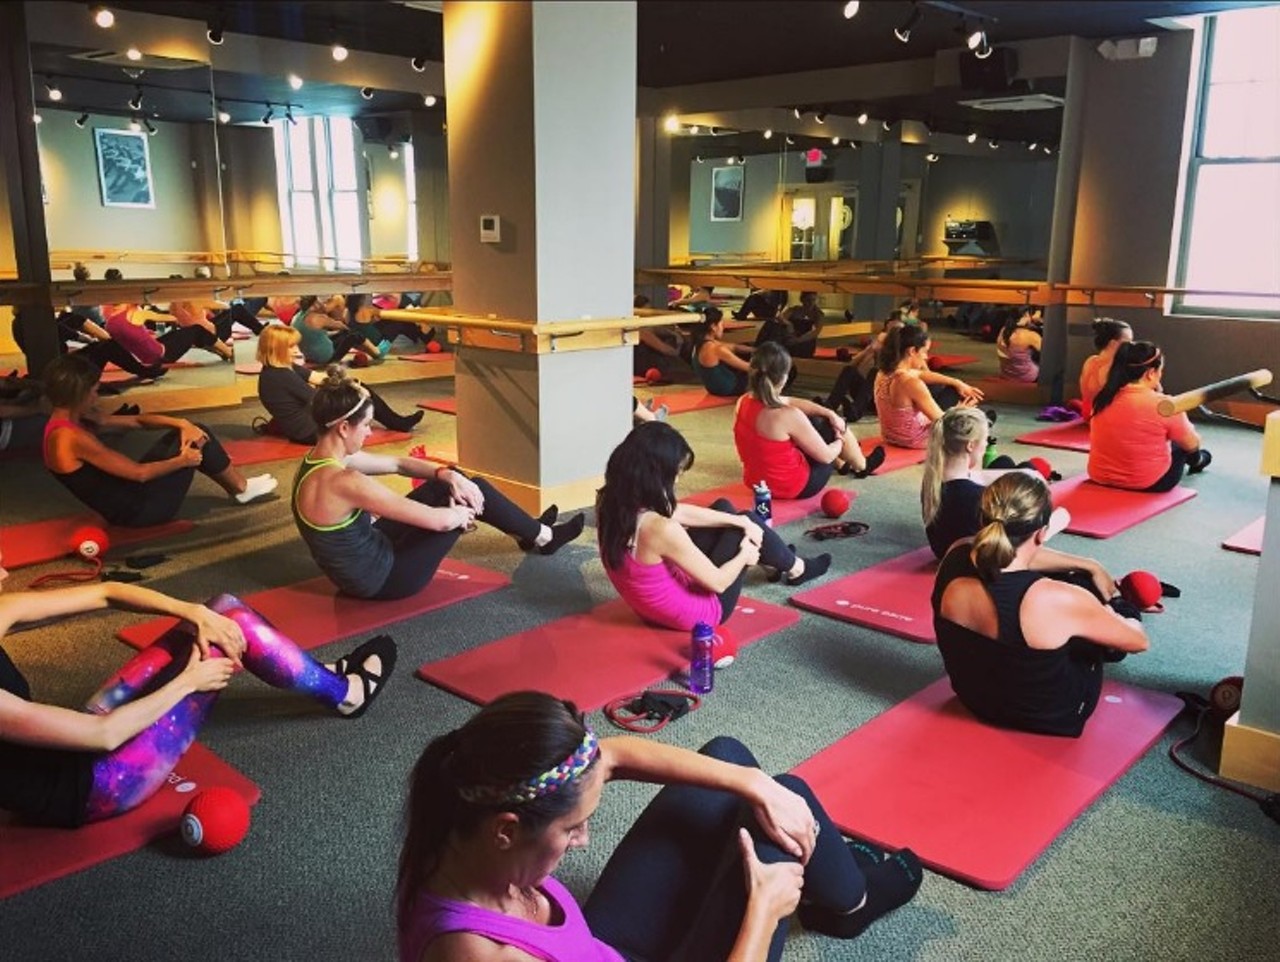 Barre Classes
You can channel your inner childhood dream of being a ballet dancer and apply it to your workout with barre classes. These fitness classes are ballet-inspired and incorporate the barre, as well as occasional mat and light weight exercises. You can find classes like this at Pure Barre (multiple locations). Photo courtesy of Instagram / purebarrestlouis.